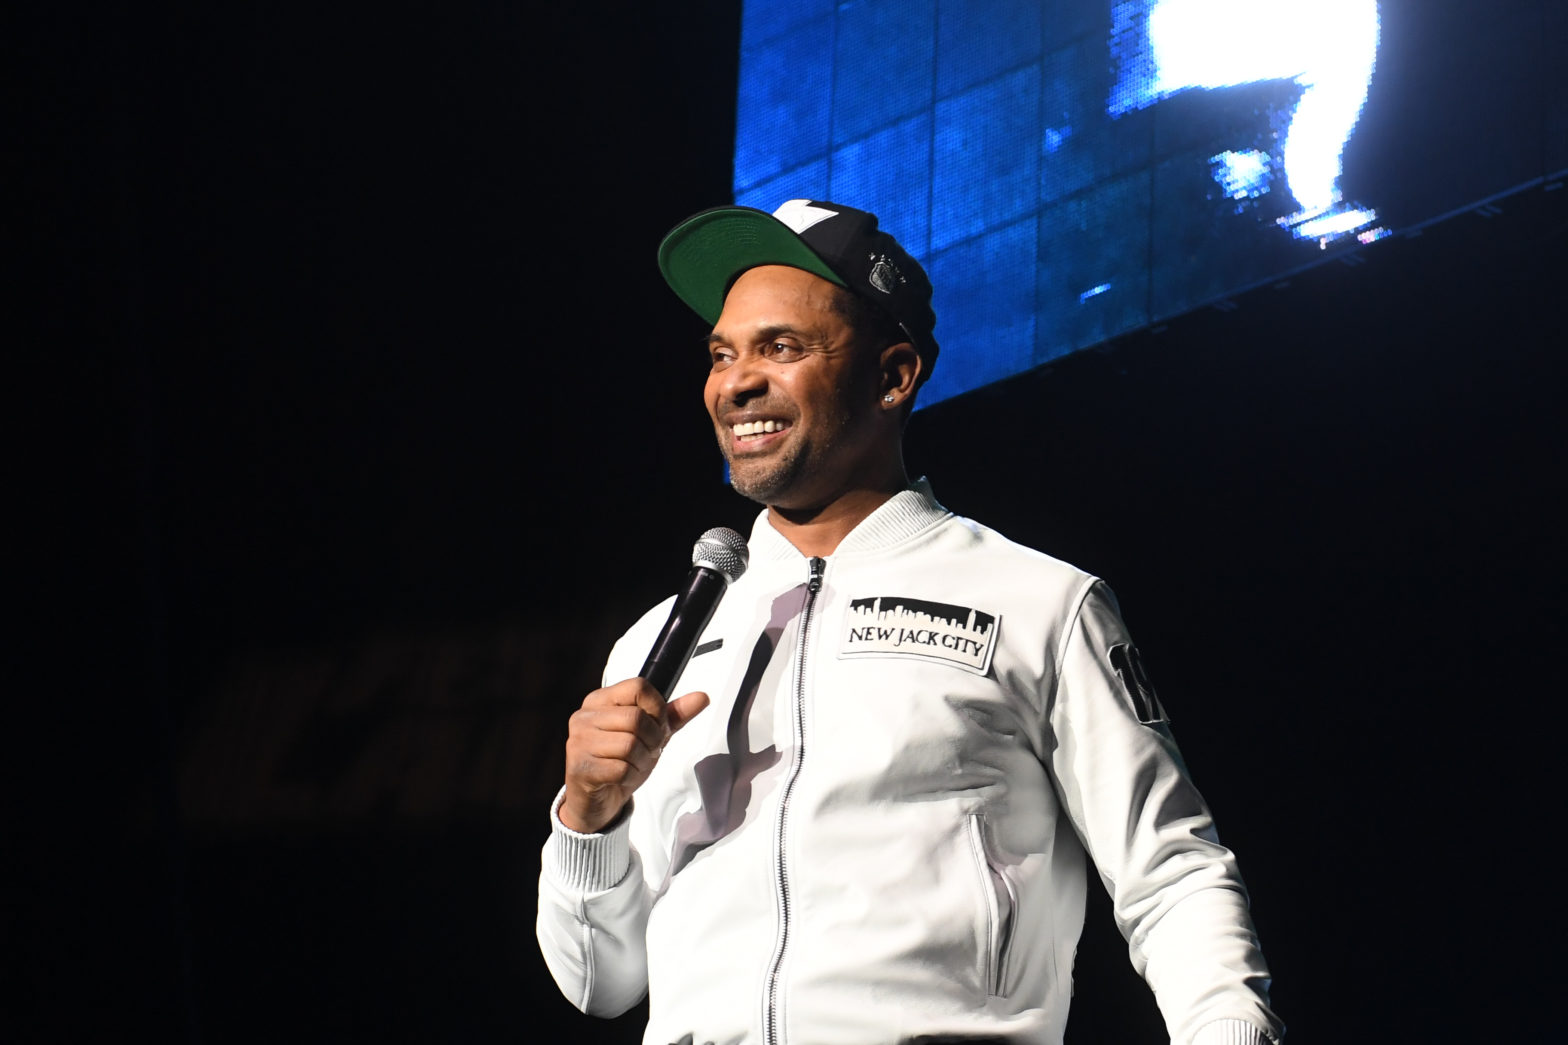 Comedian Mike Epps Set To Open Comedy Club In Downtown Detroit